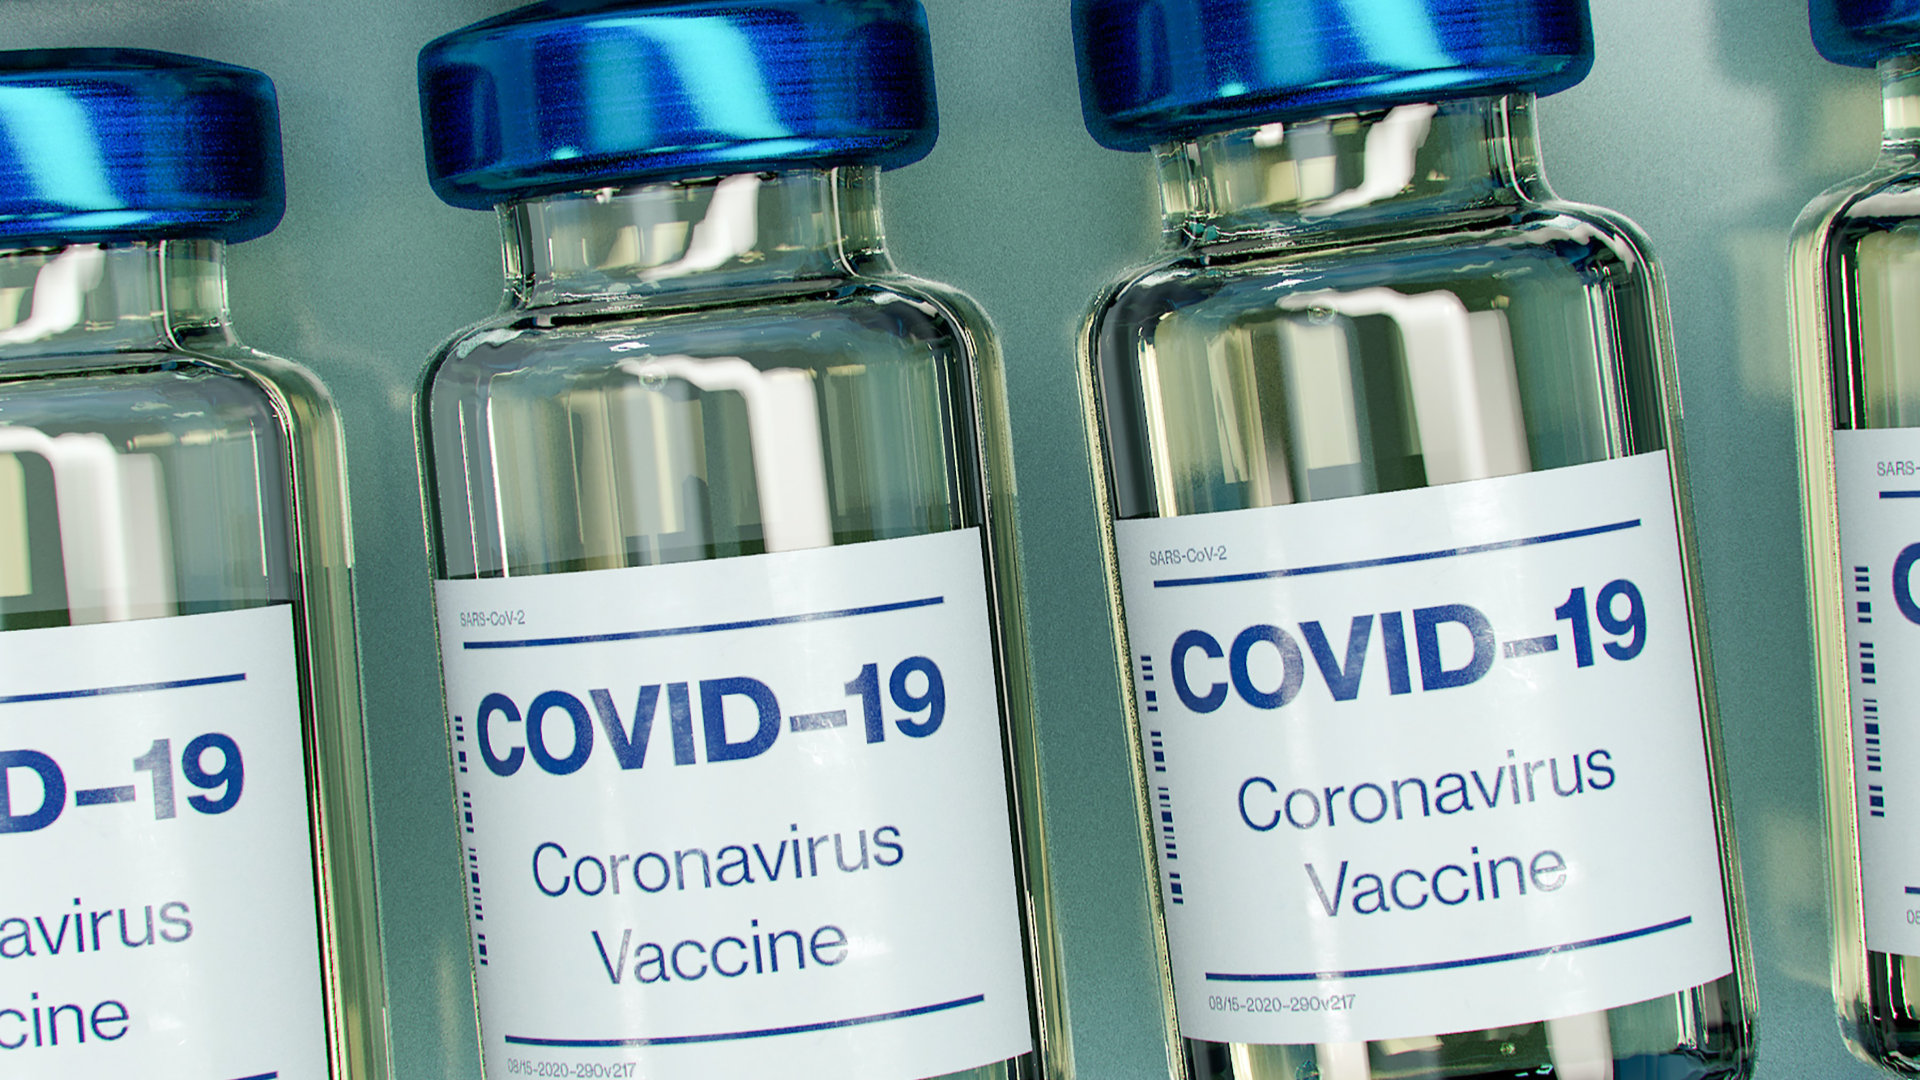 COVID vaccination and EHR​ projects rely on Retarus’ high-performance email technology and data protection